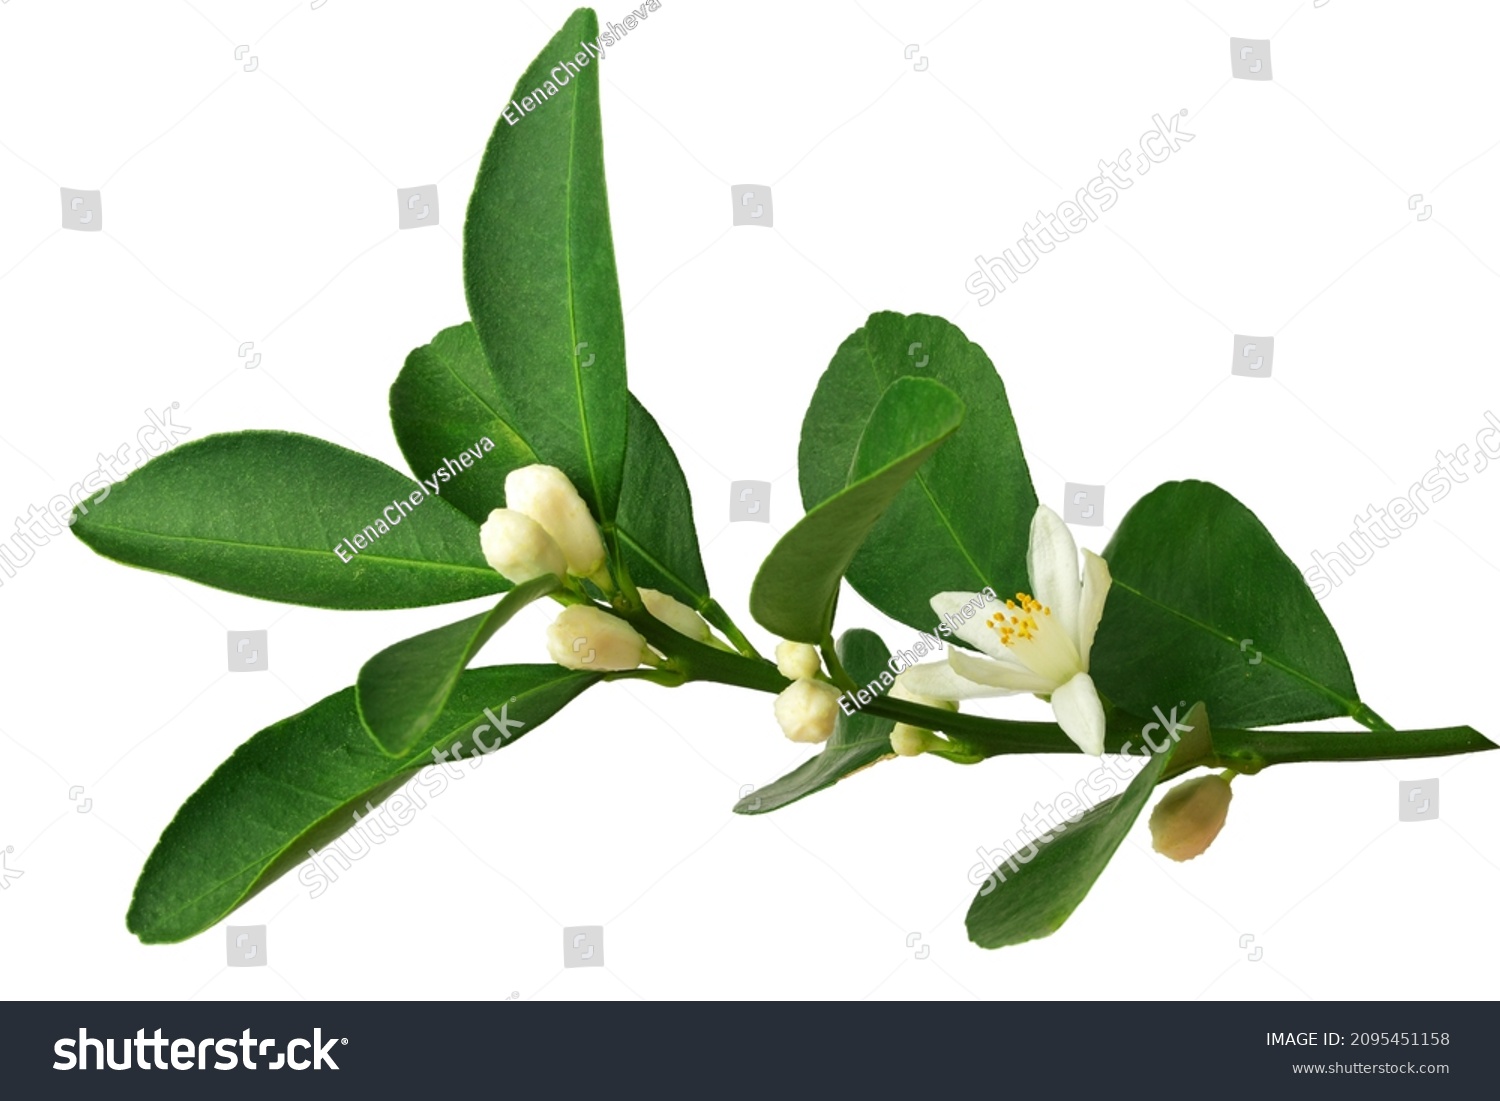 a branch of an orange or tangerine tree with fruits and flowers, isolated on a white background #2095451158